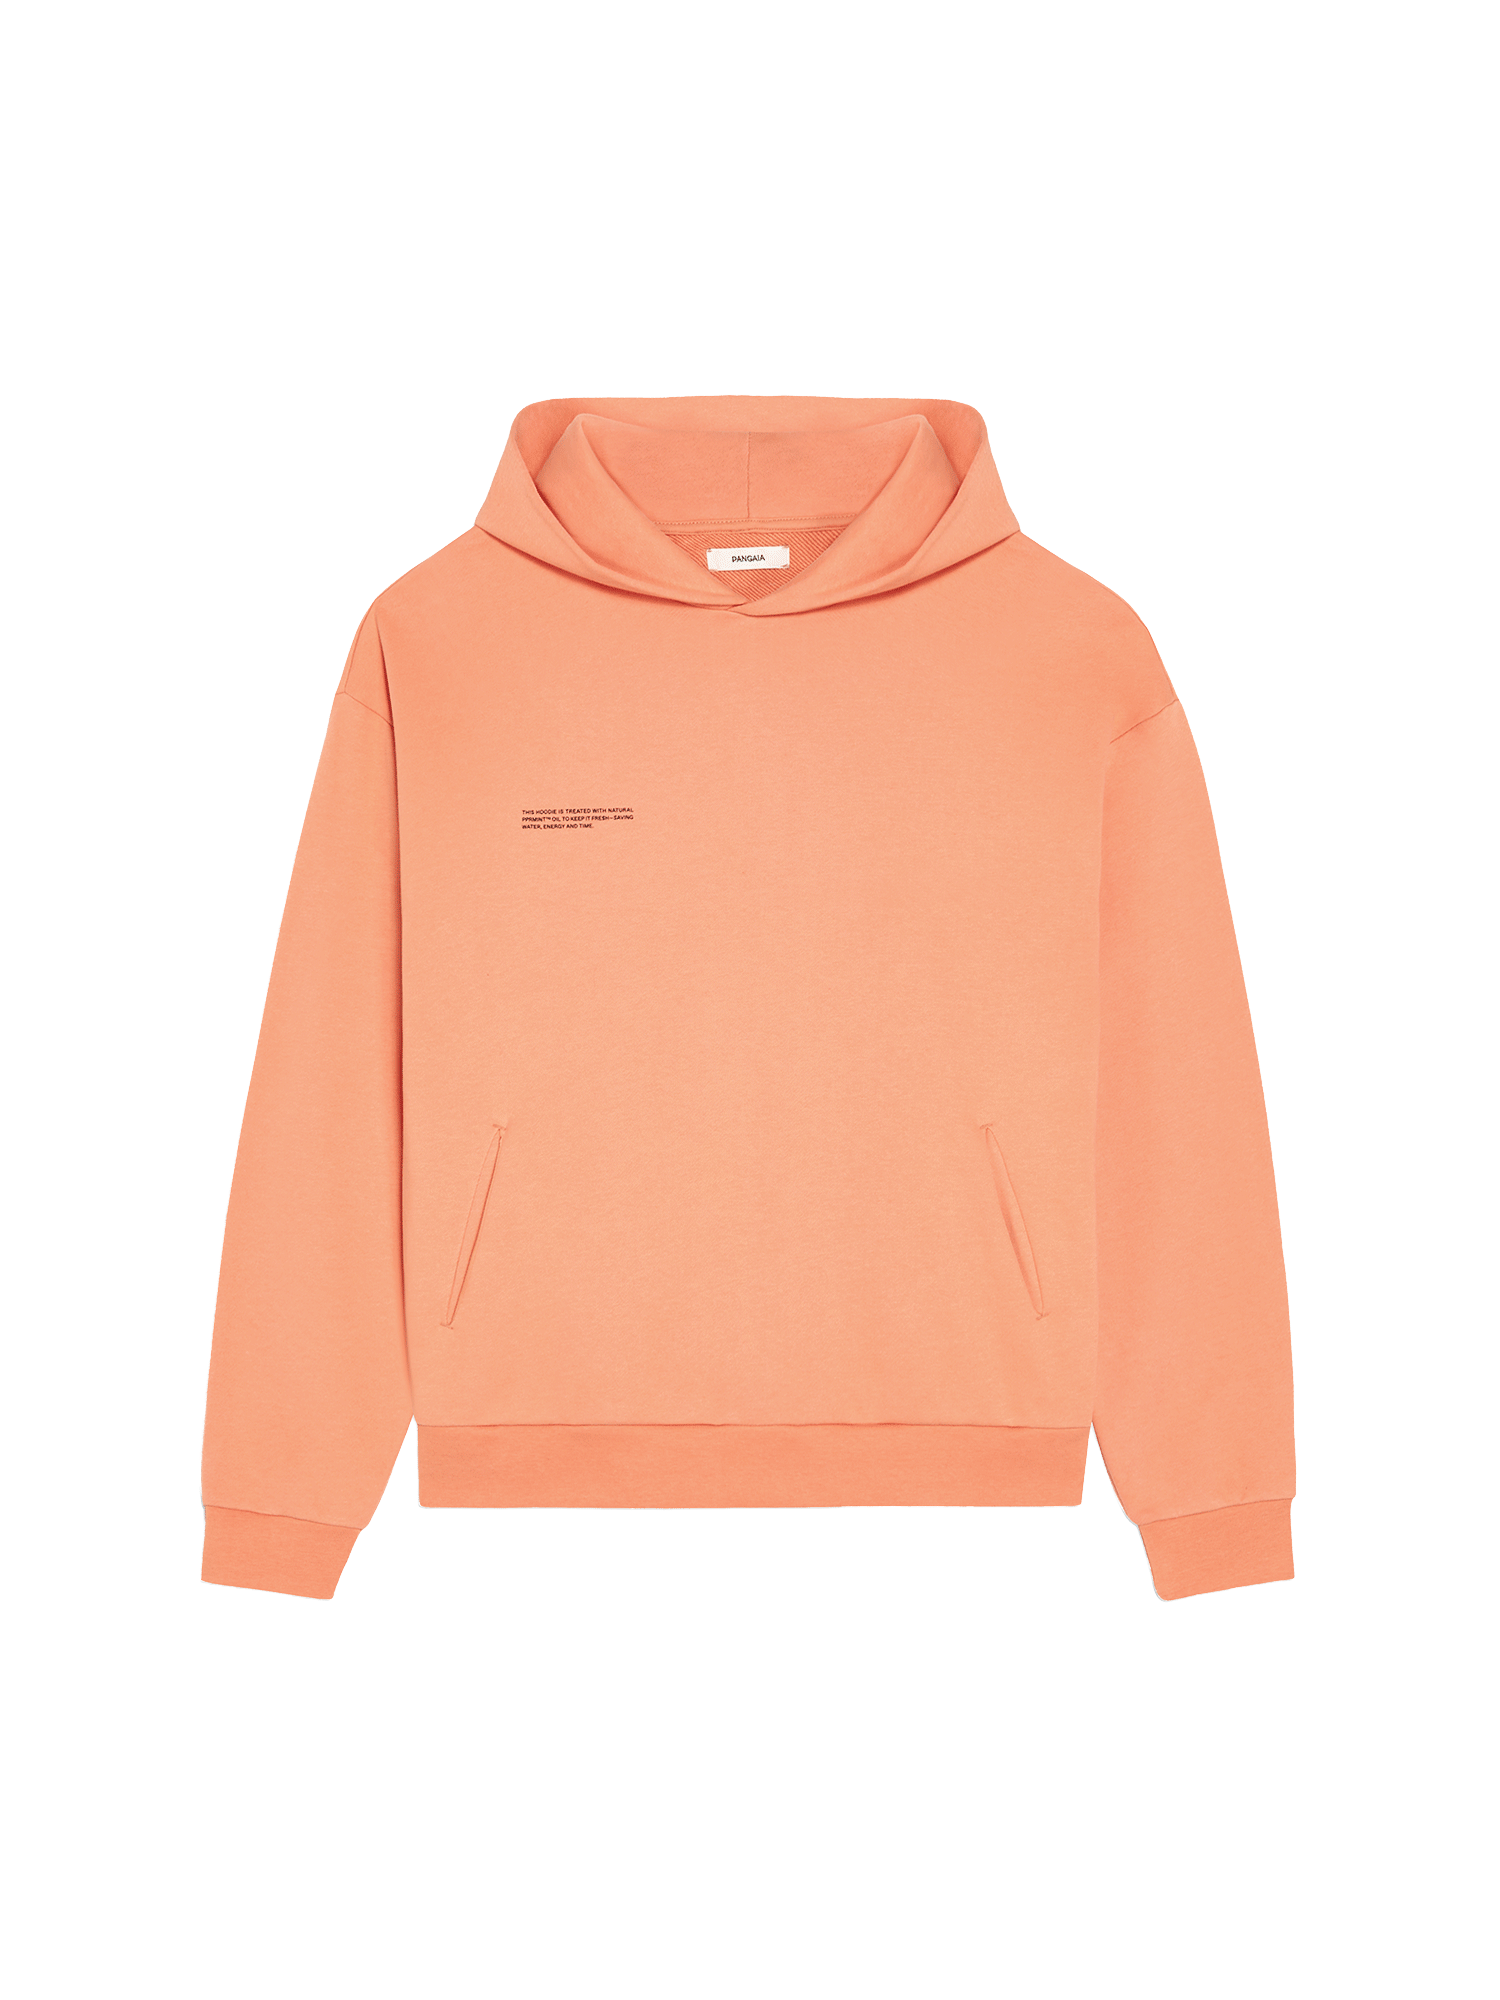 https://storage.googleapis.com/download/storage/v1/b/whering.appspot.com/o/marketplace_product_images%2Fpangaia-365-midweight-hoodiepeach-perfect-coral-8VEEbZe5Vg7kMYkjVrcVCd.png?generation=1690693237565865&alt=media